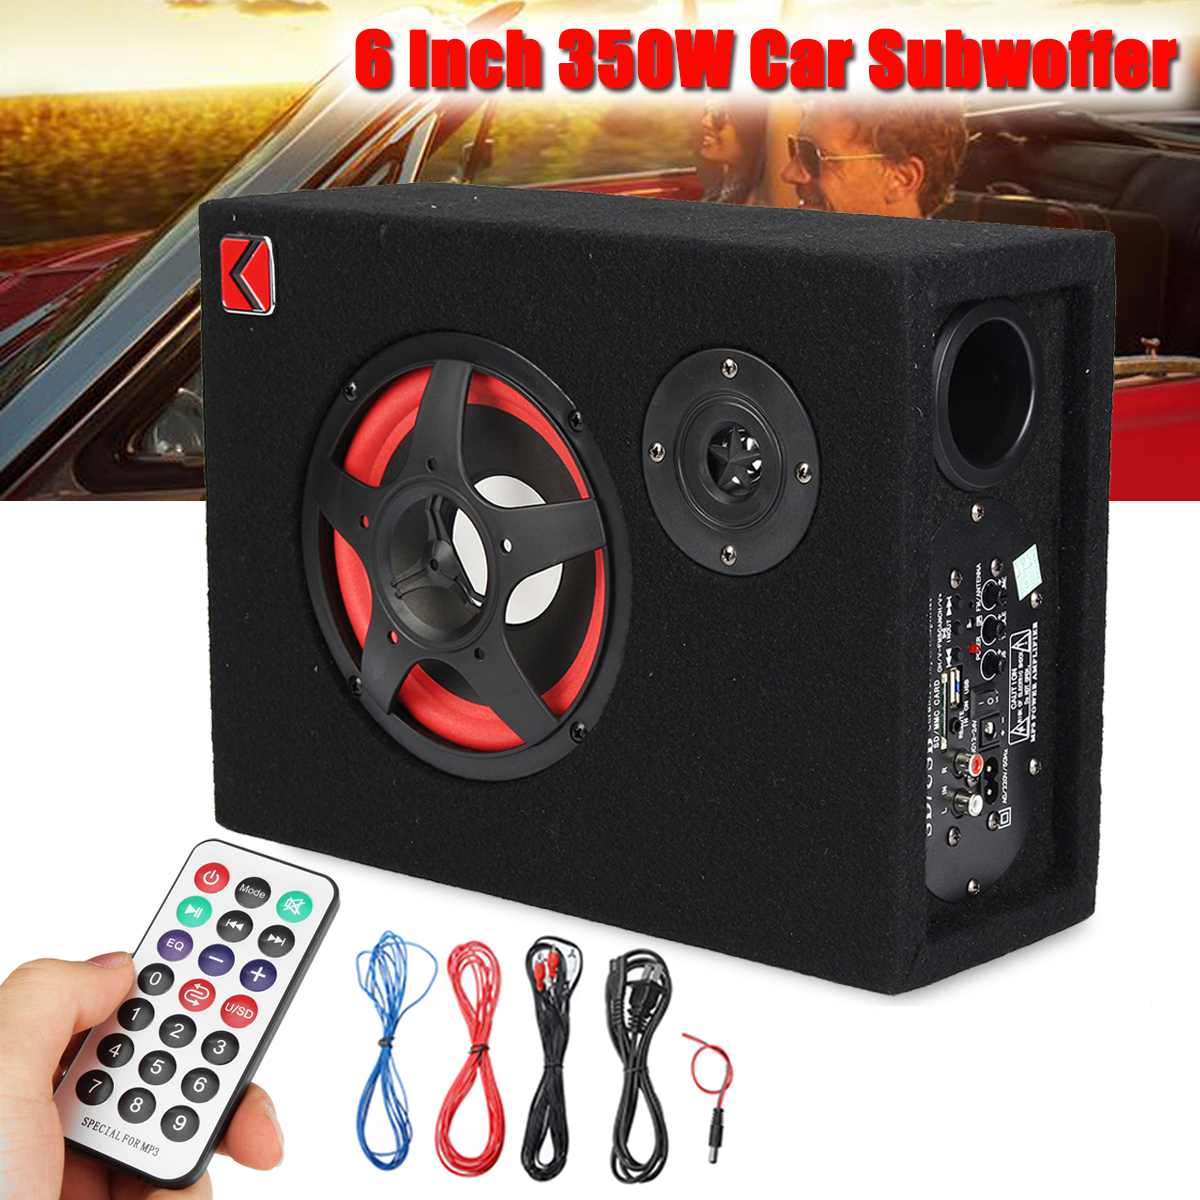 350W Car Subwoofer Theater Amplifier Stereo Bass Under Seat Active Powerful 6 inch Card Car Seat Power Digital Audio Speaker